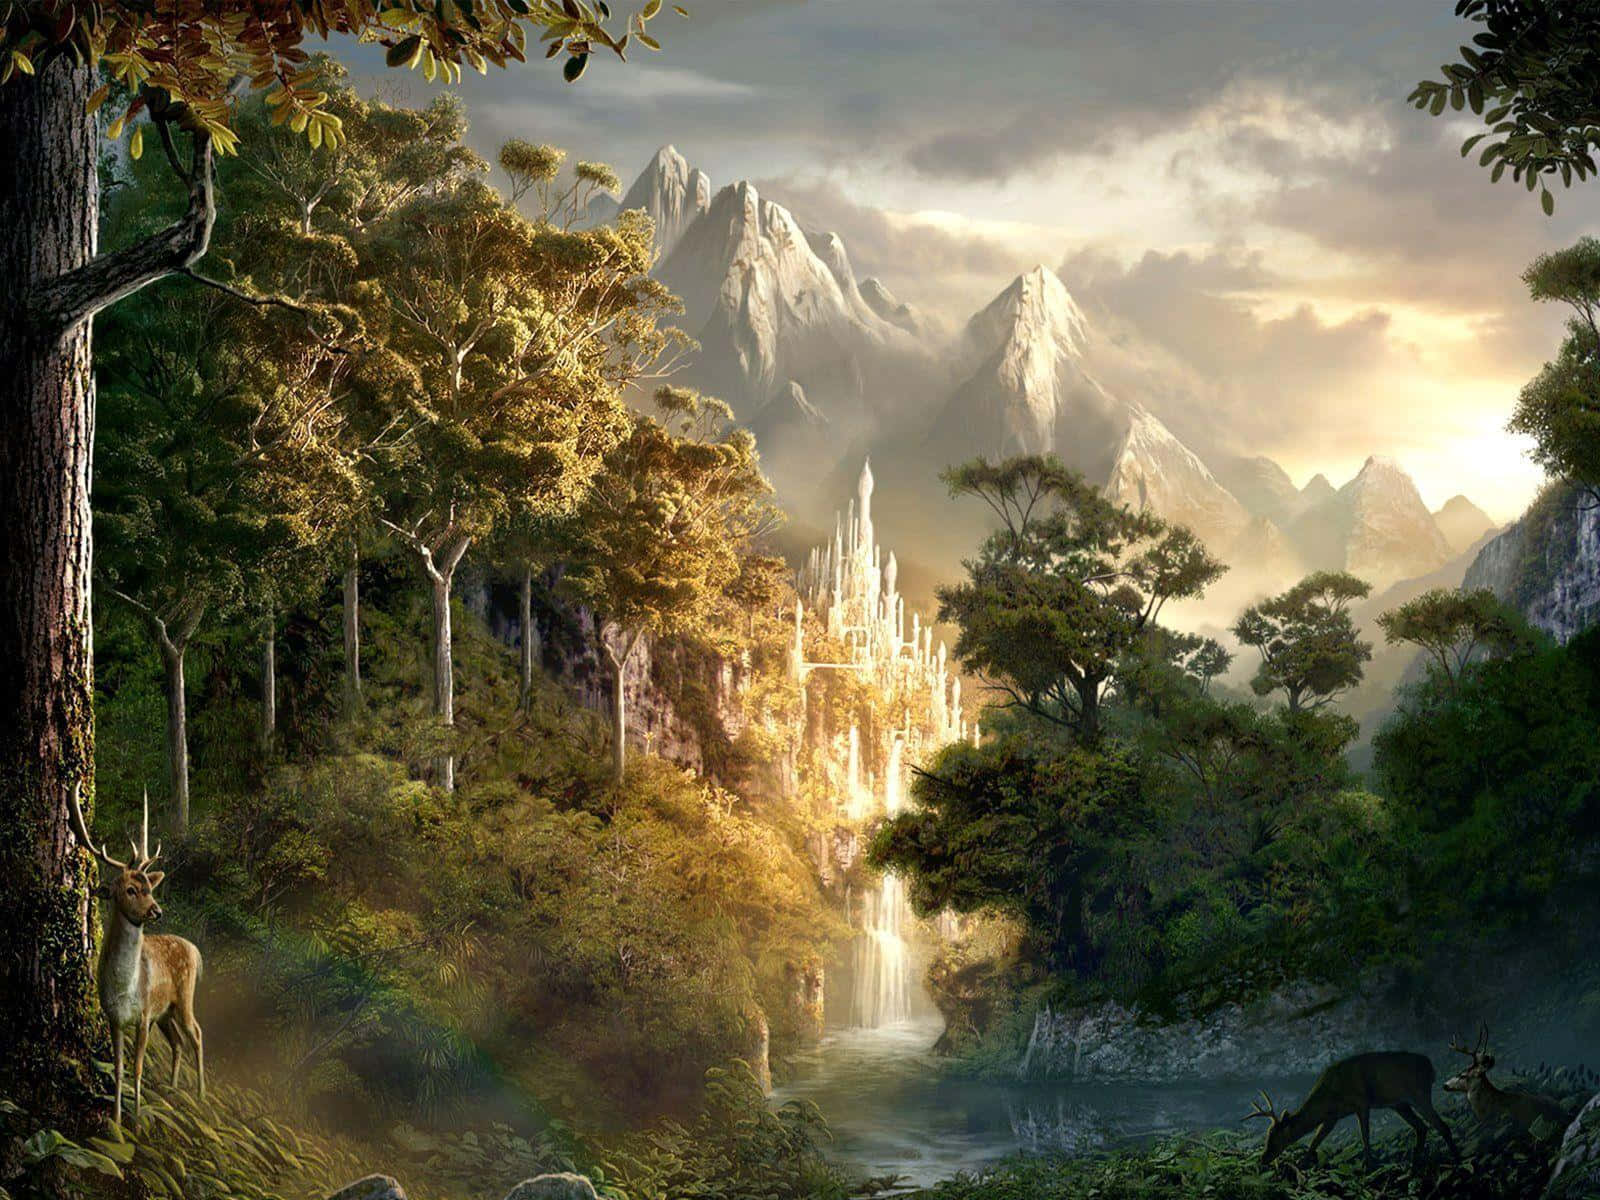 About The Hobbit Trilogy | New Zealand